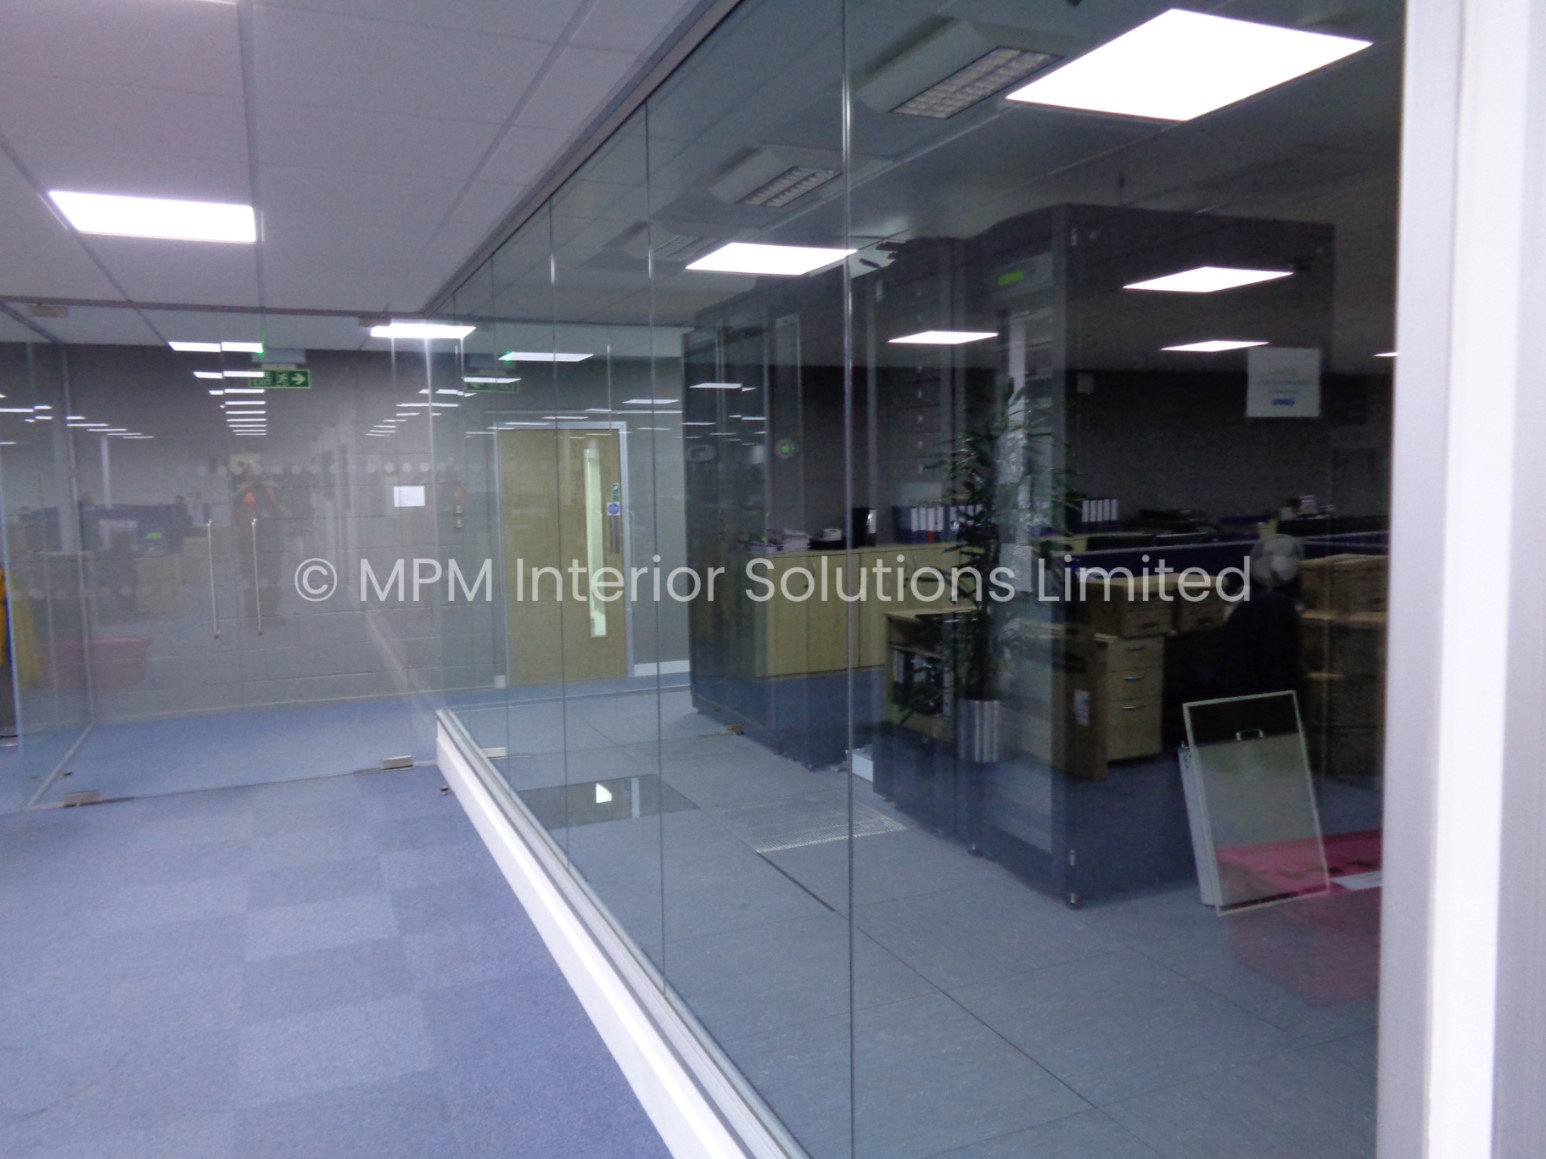 Frameless Glass Office Partitioning, Office Refurbishment/Fit-Out, Keysource Ltd (Horsham, West Sussex), MPM Interior Solutions Limited